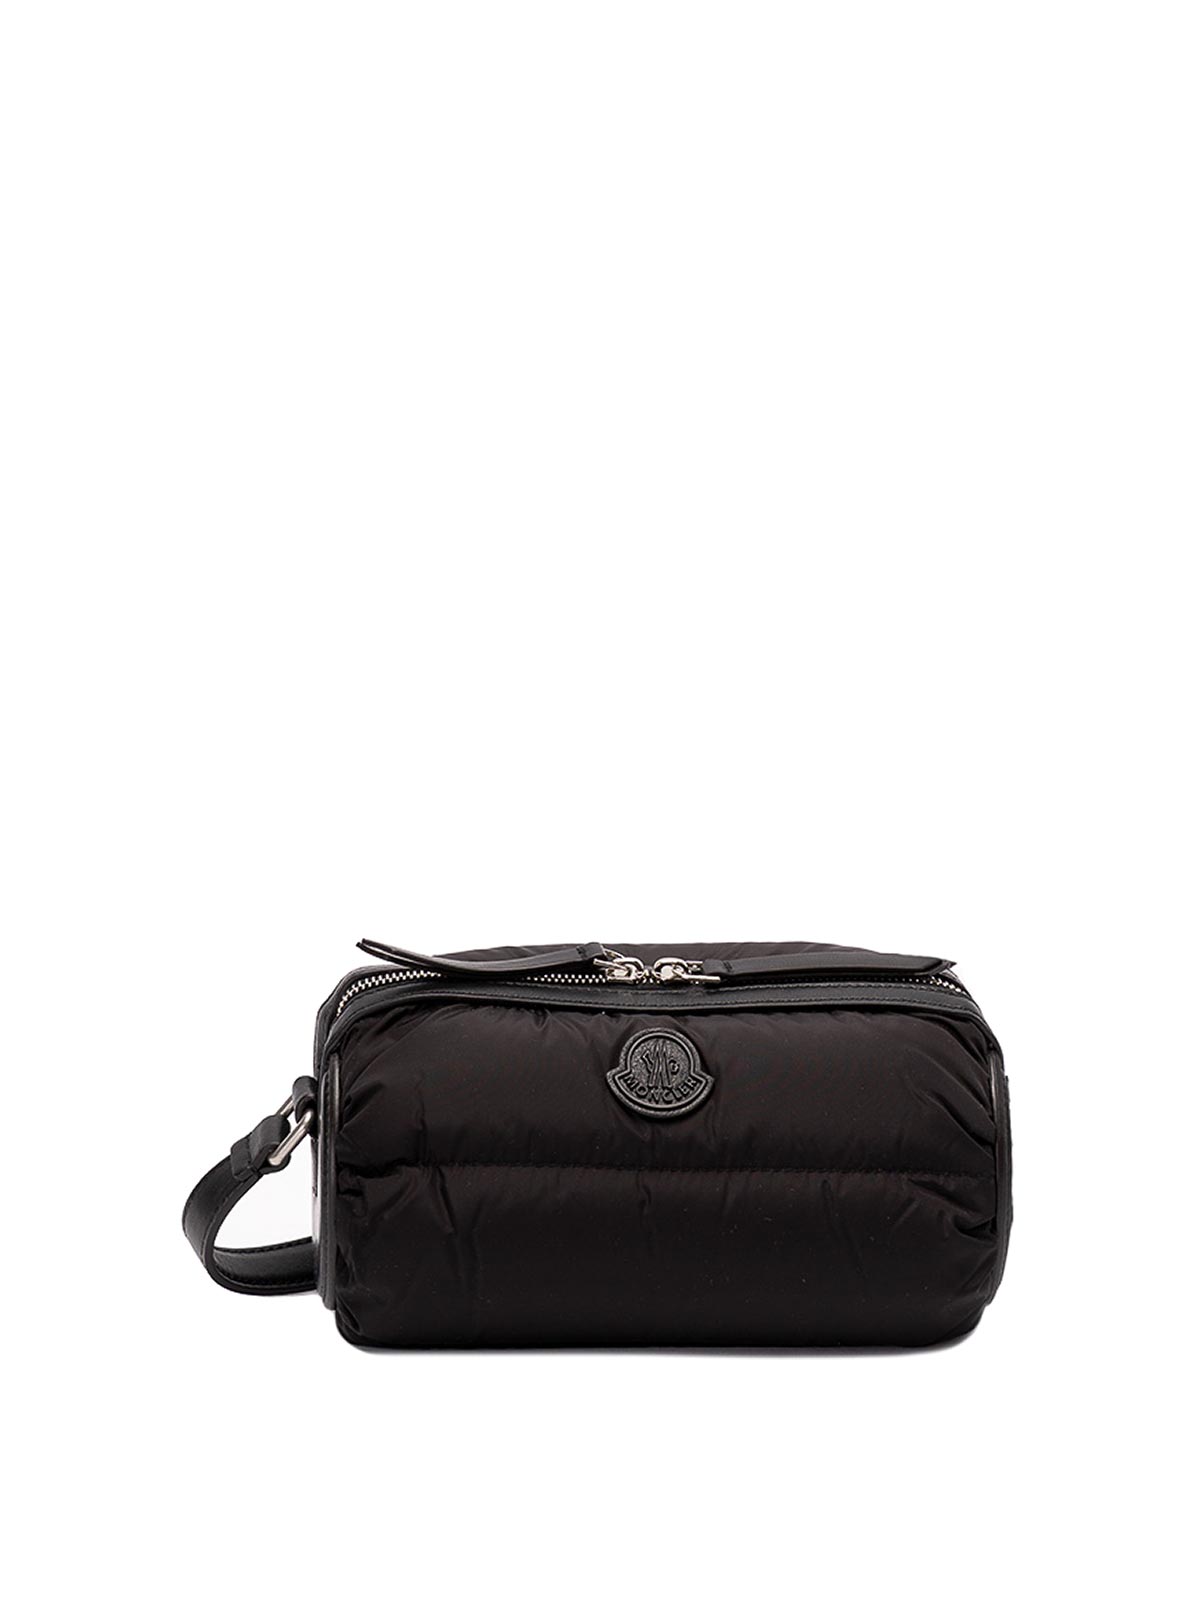 Moncler Clutch Bag Pink in Box Promo Gift New India | Ubuy